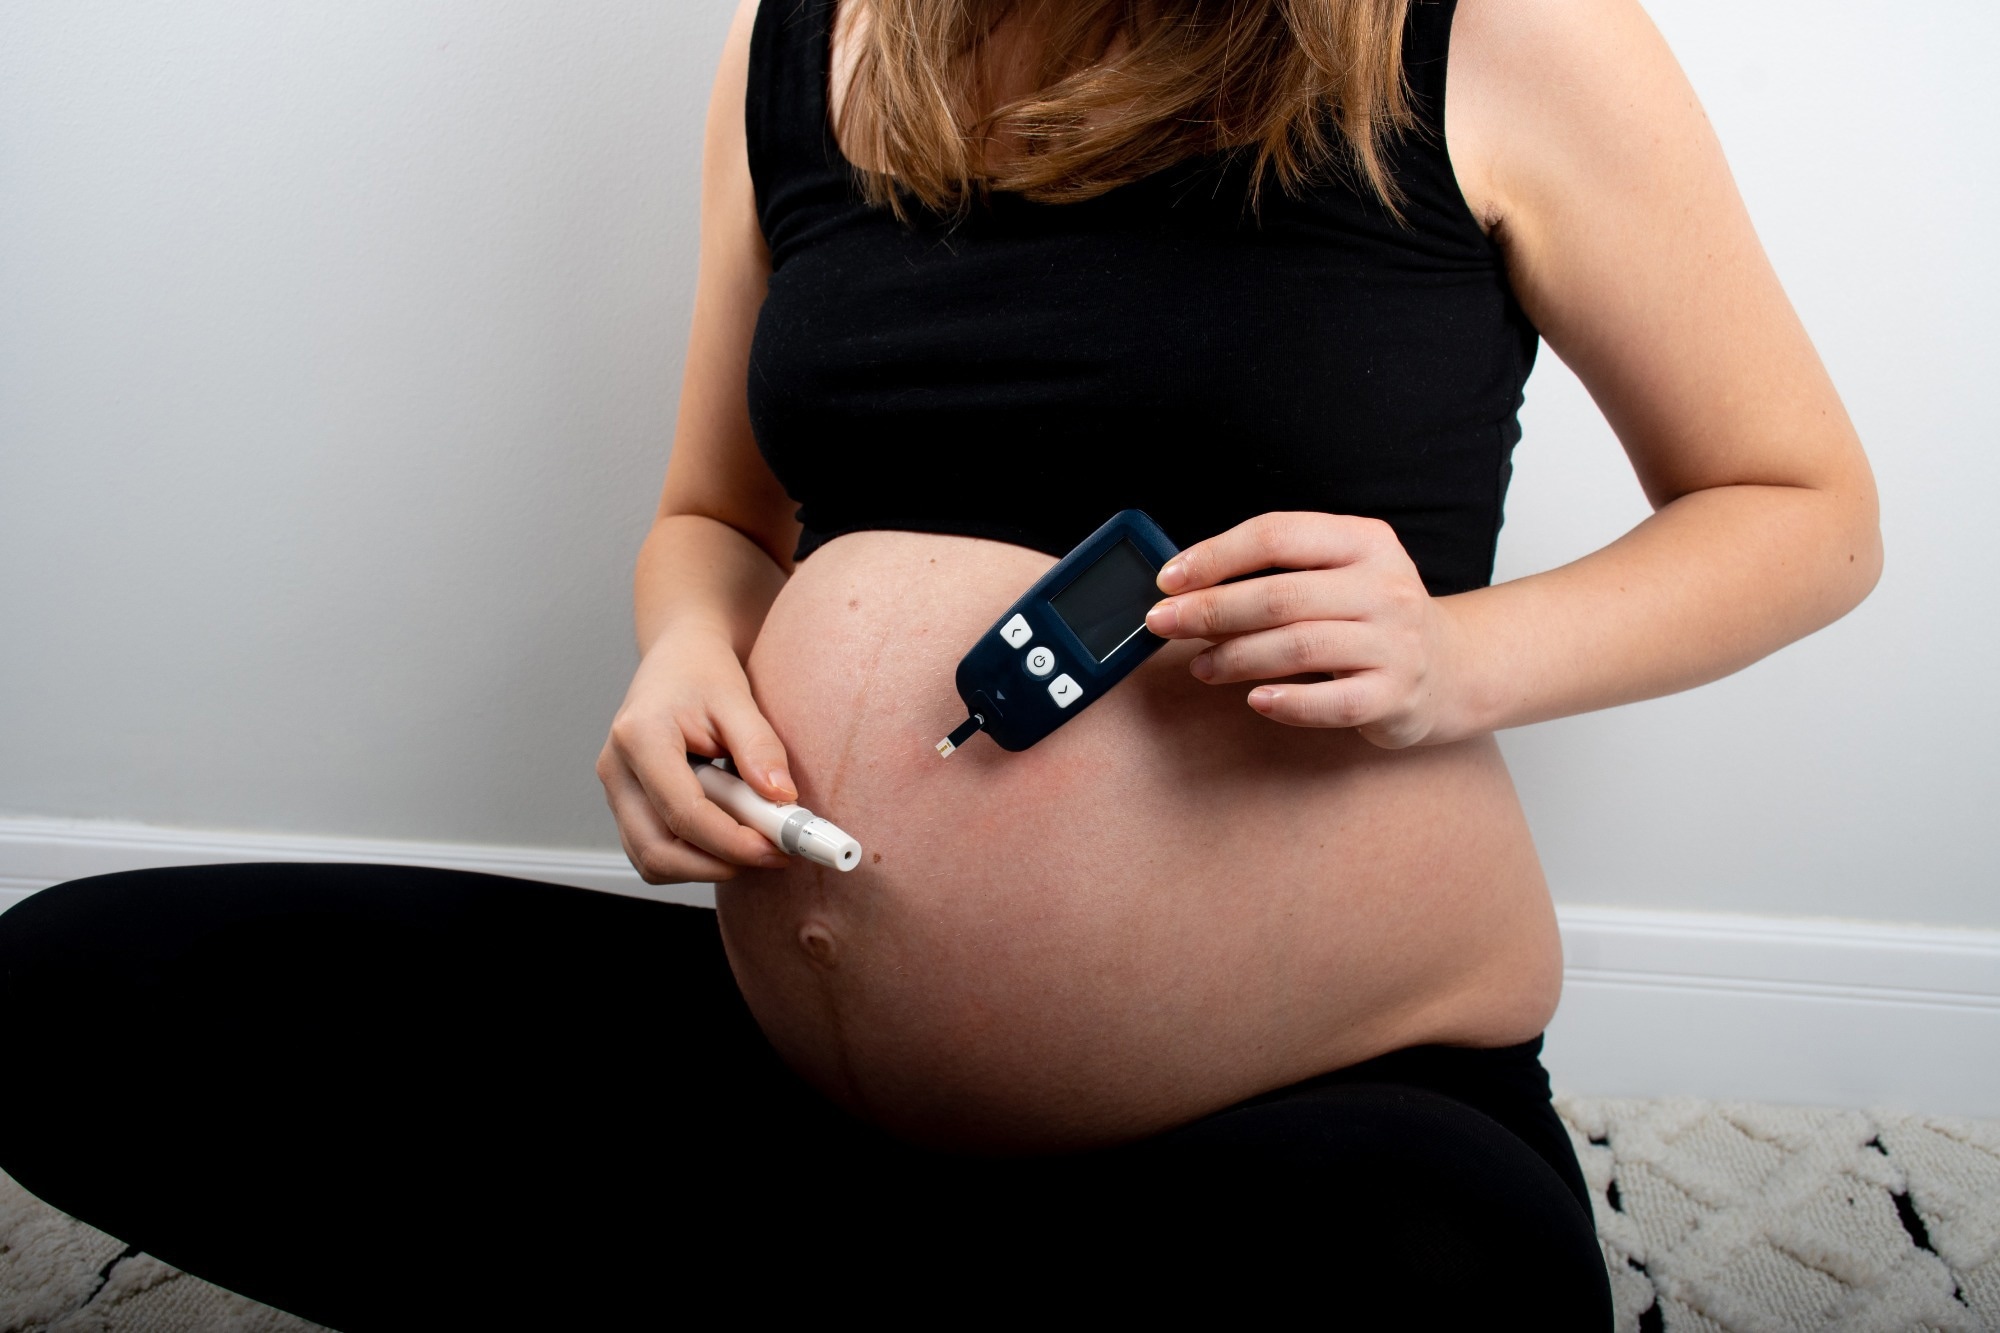 Study: Maternal obesity and gestational diabetes reprogram the methylome of offspring beyond birth by inducing epigenetic signatures in metabolic and developmental pathways. Image Credit: Cristina.A / Shutterstock